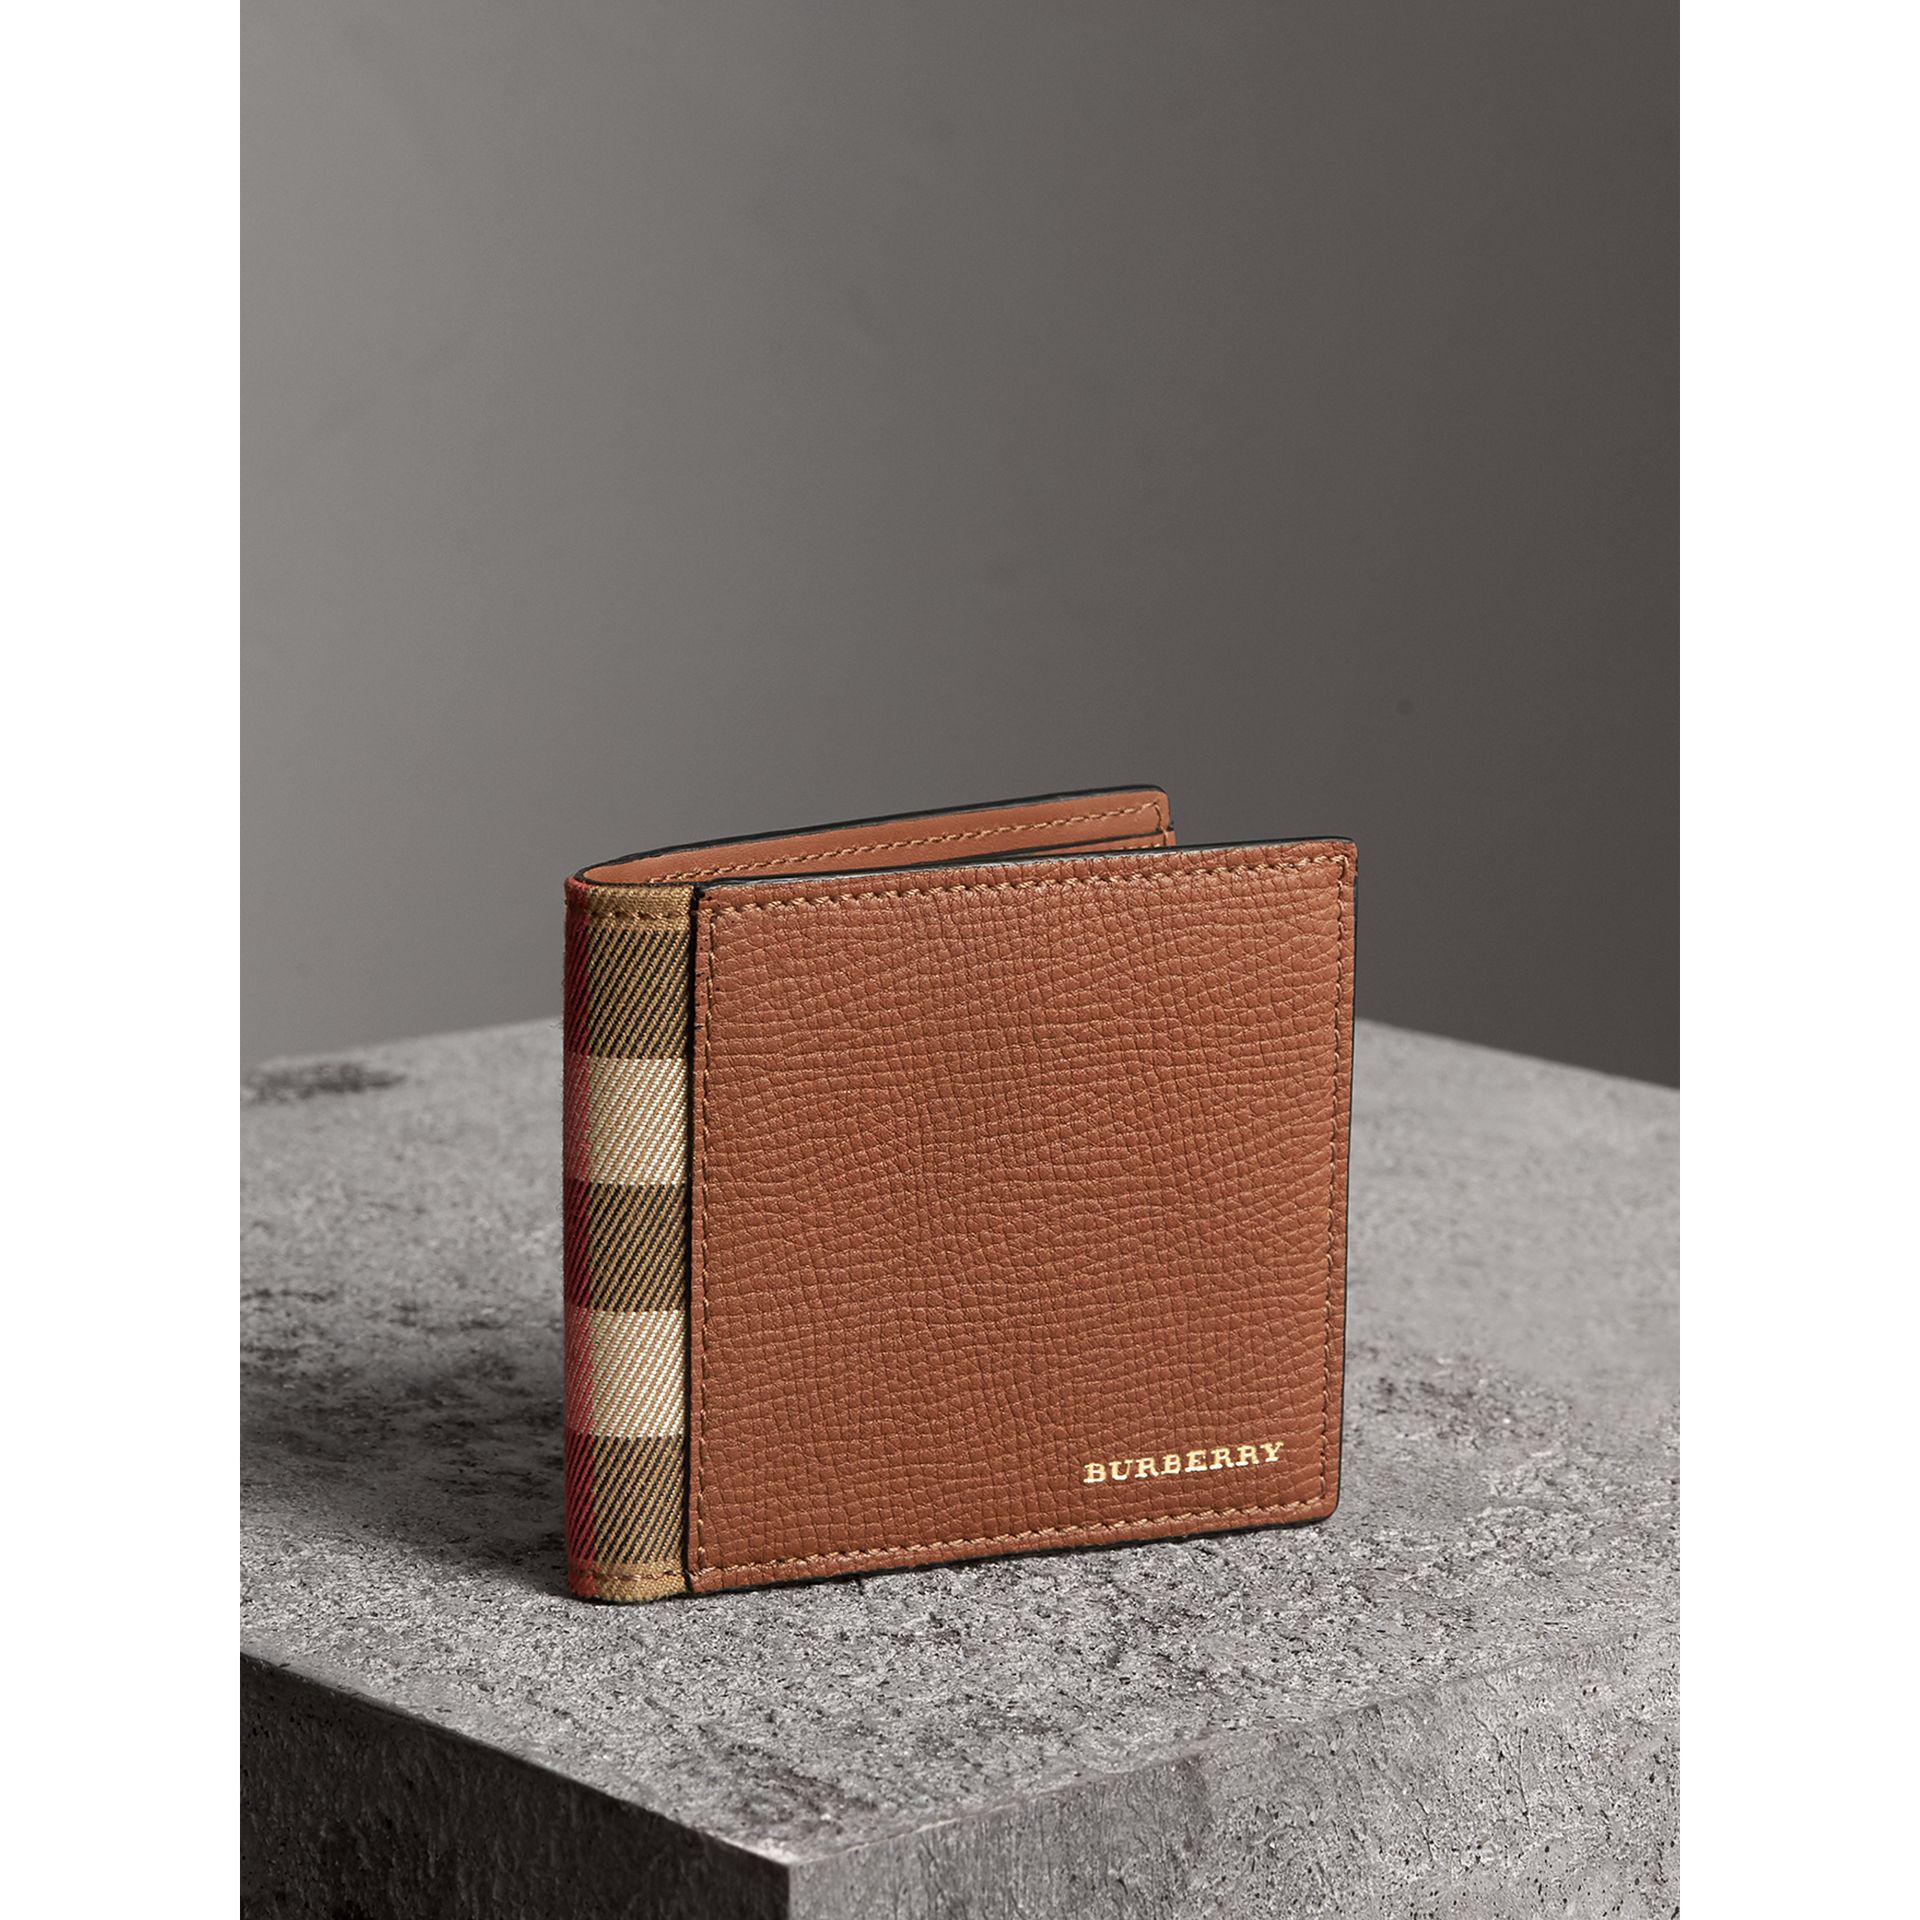 Burberry Leather And House Check International Bifold Wallet in